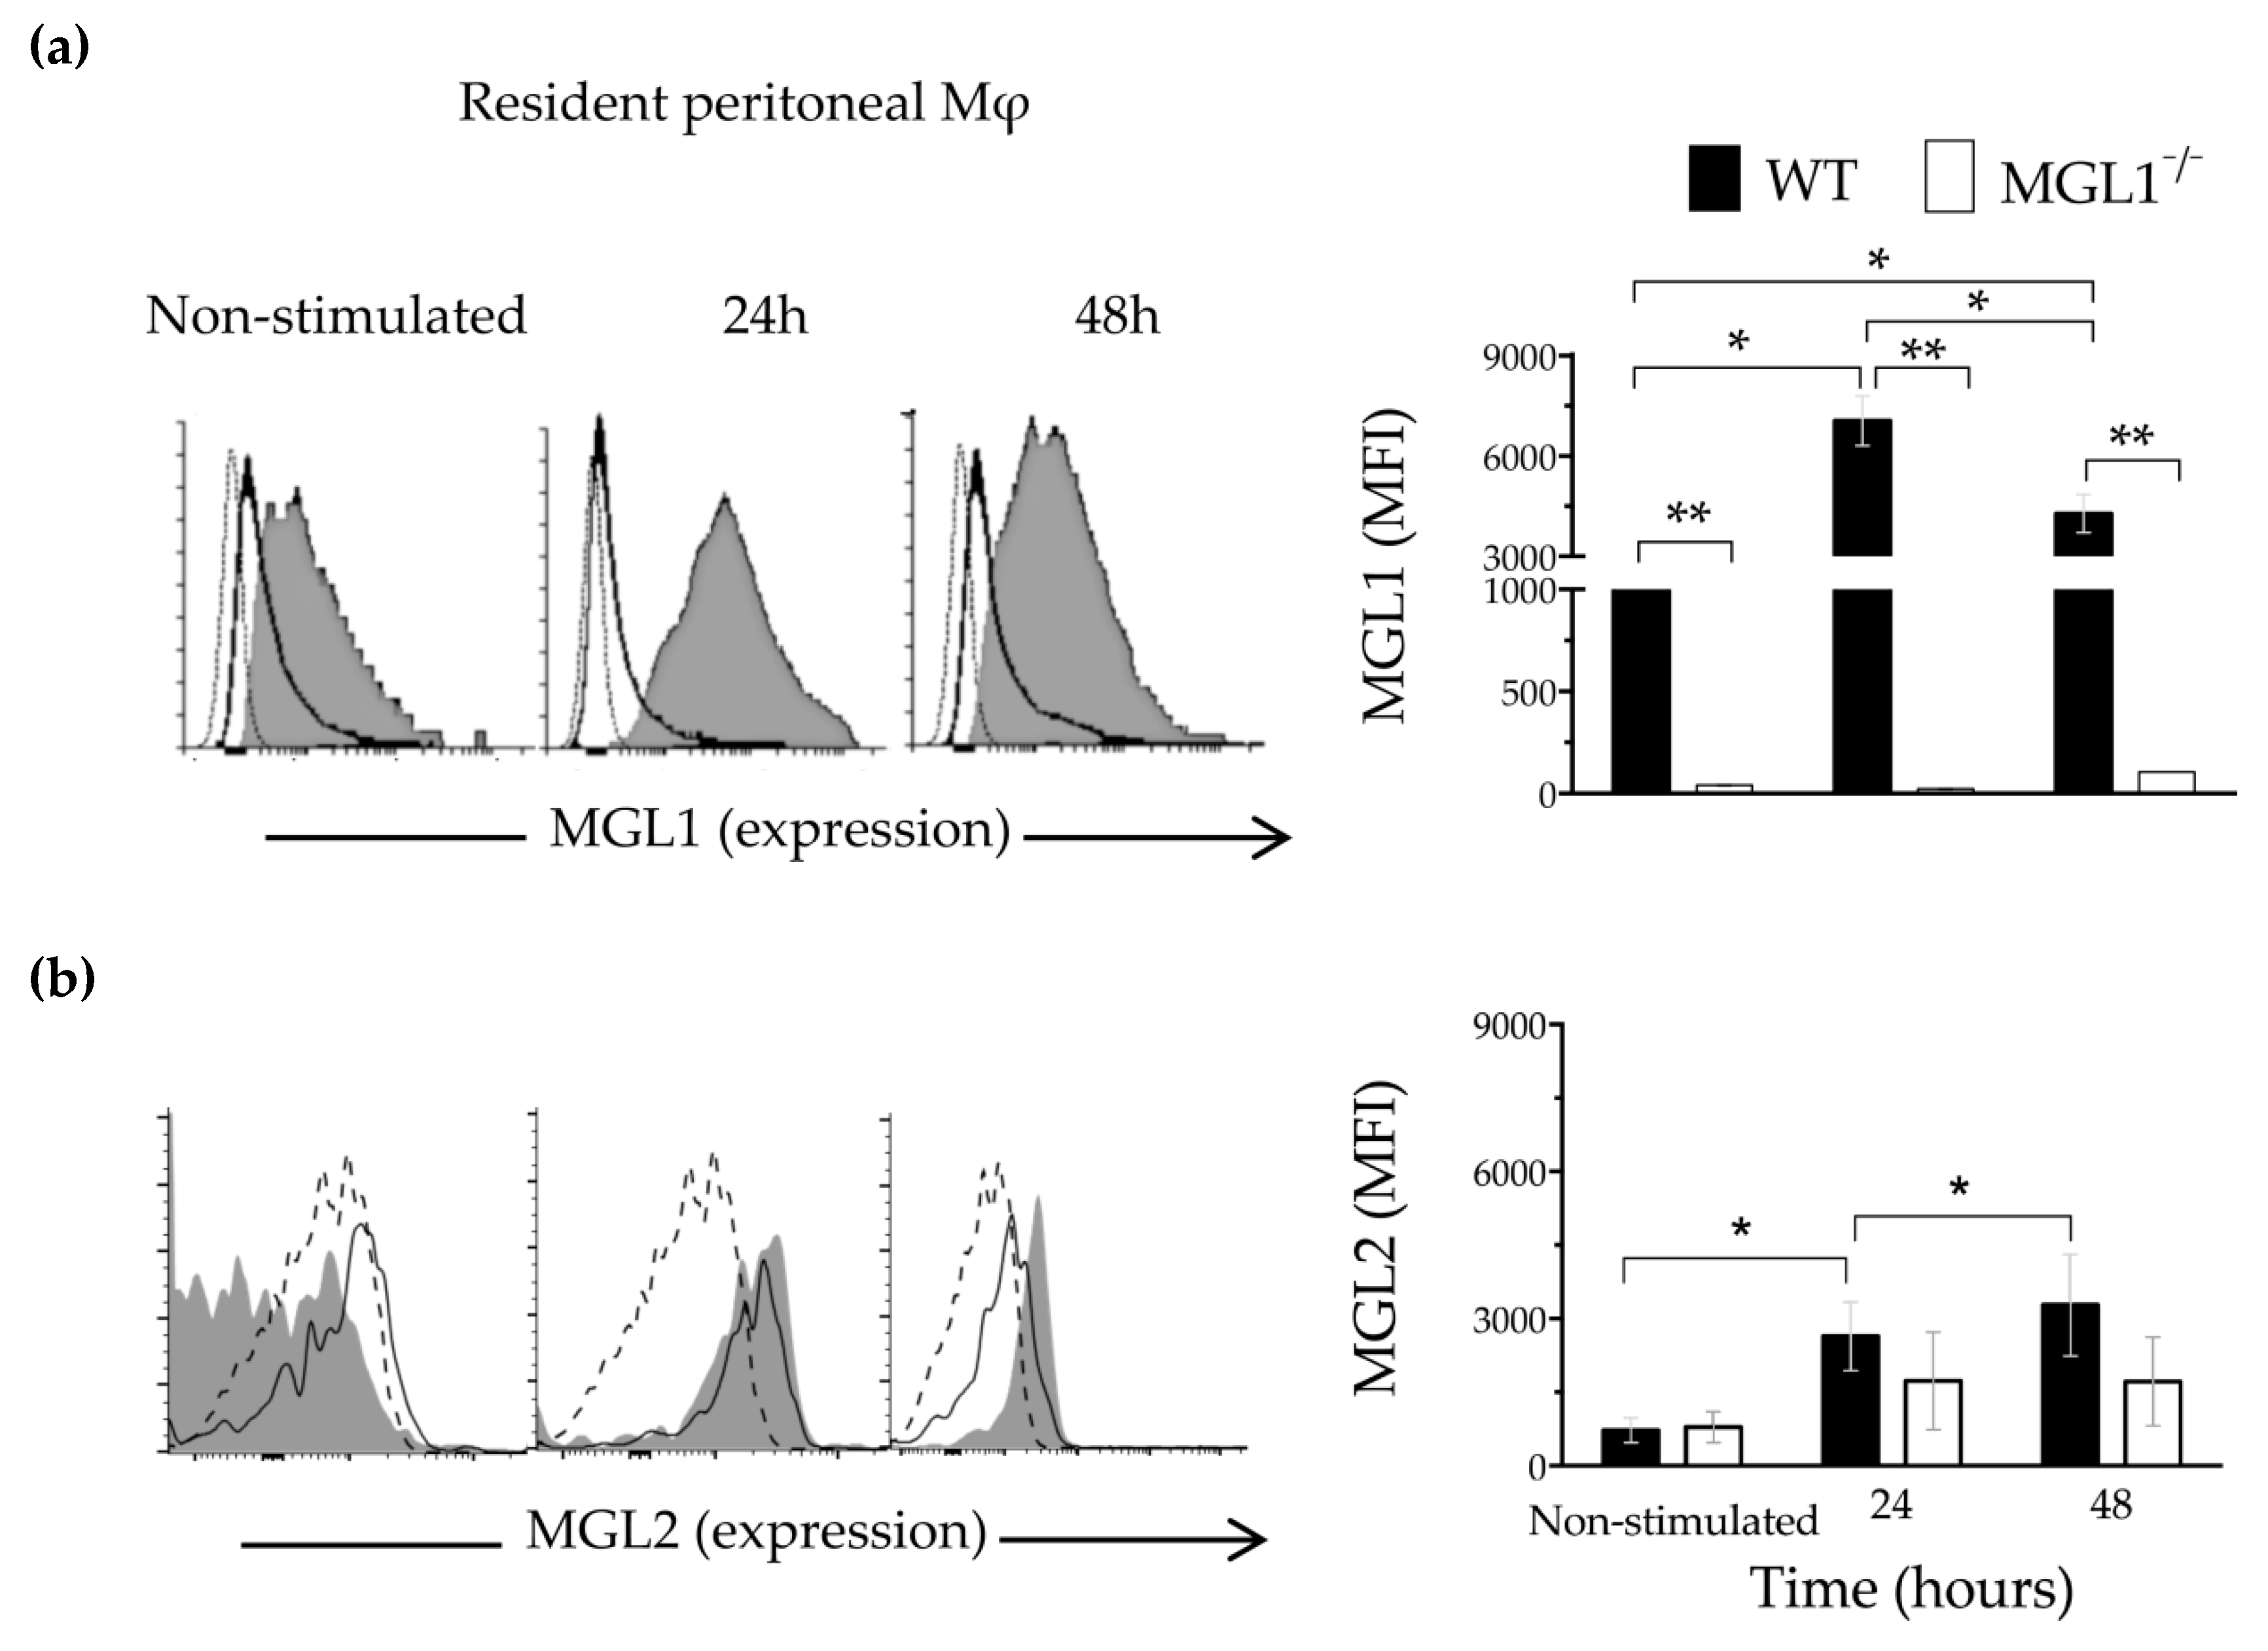 Cells | Free Full-Text | MGL1 Receptor Plays a Key Role in the Control of  T. cruzi Infection by Increasing Macrophage Activation through Modulation  of ERK1/2, c-Jun, NF-κB and NLRP3 Pathways